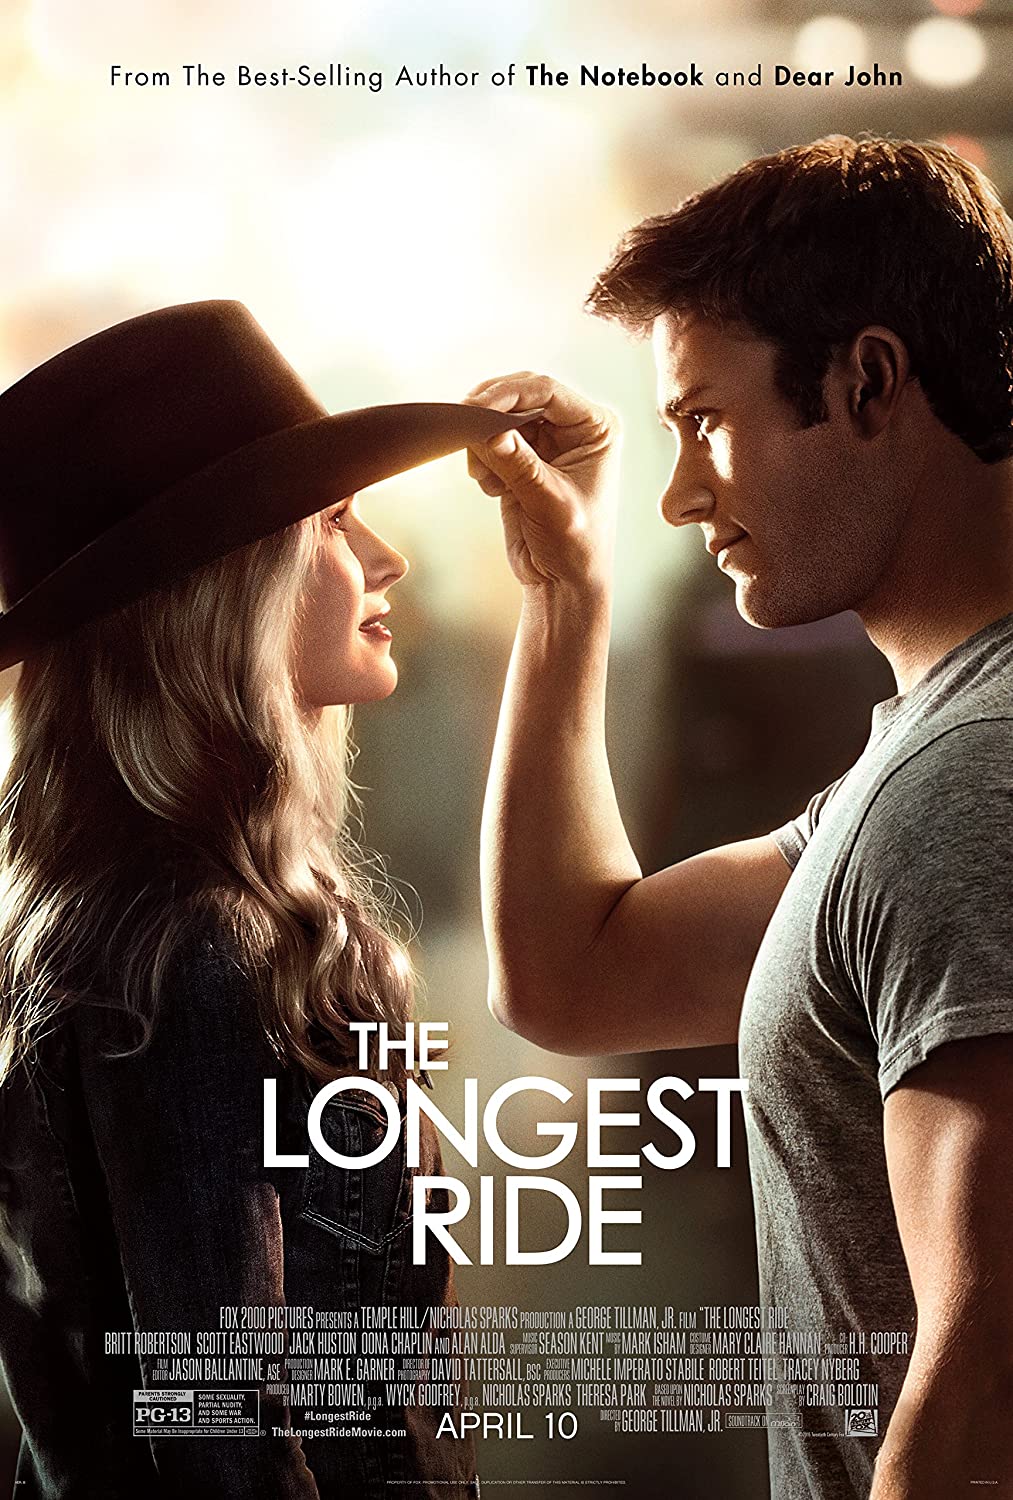 THE LONGEST RIDE': Multi-Generational Story of Two Extraordinary Love  Stories